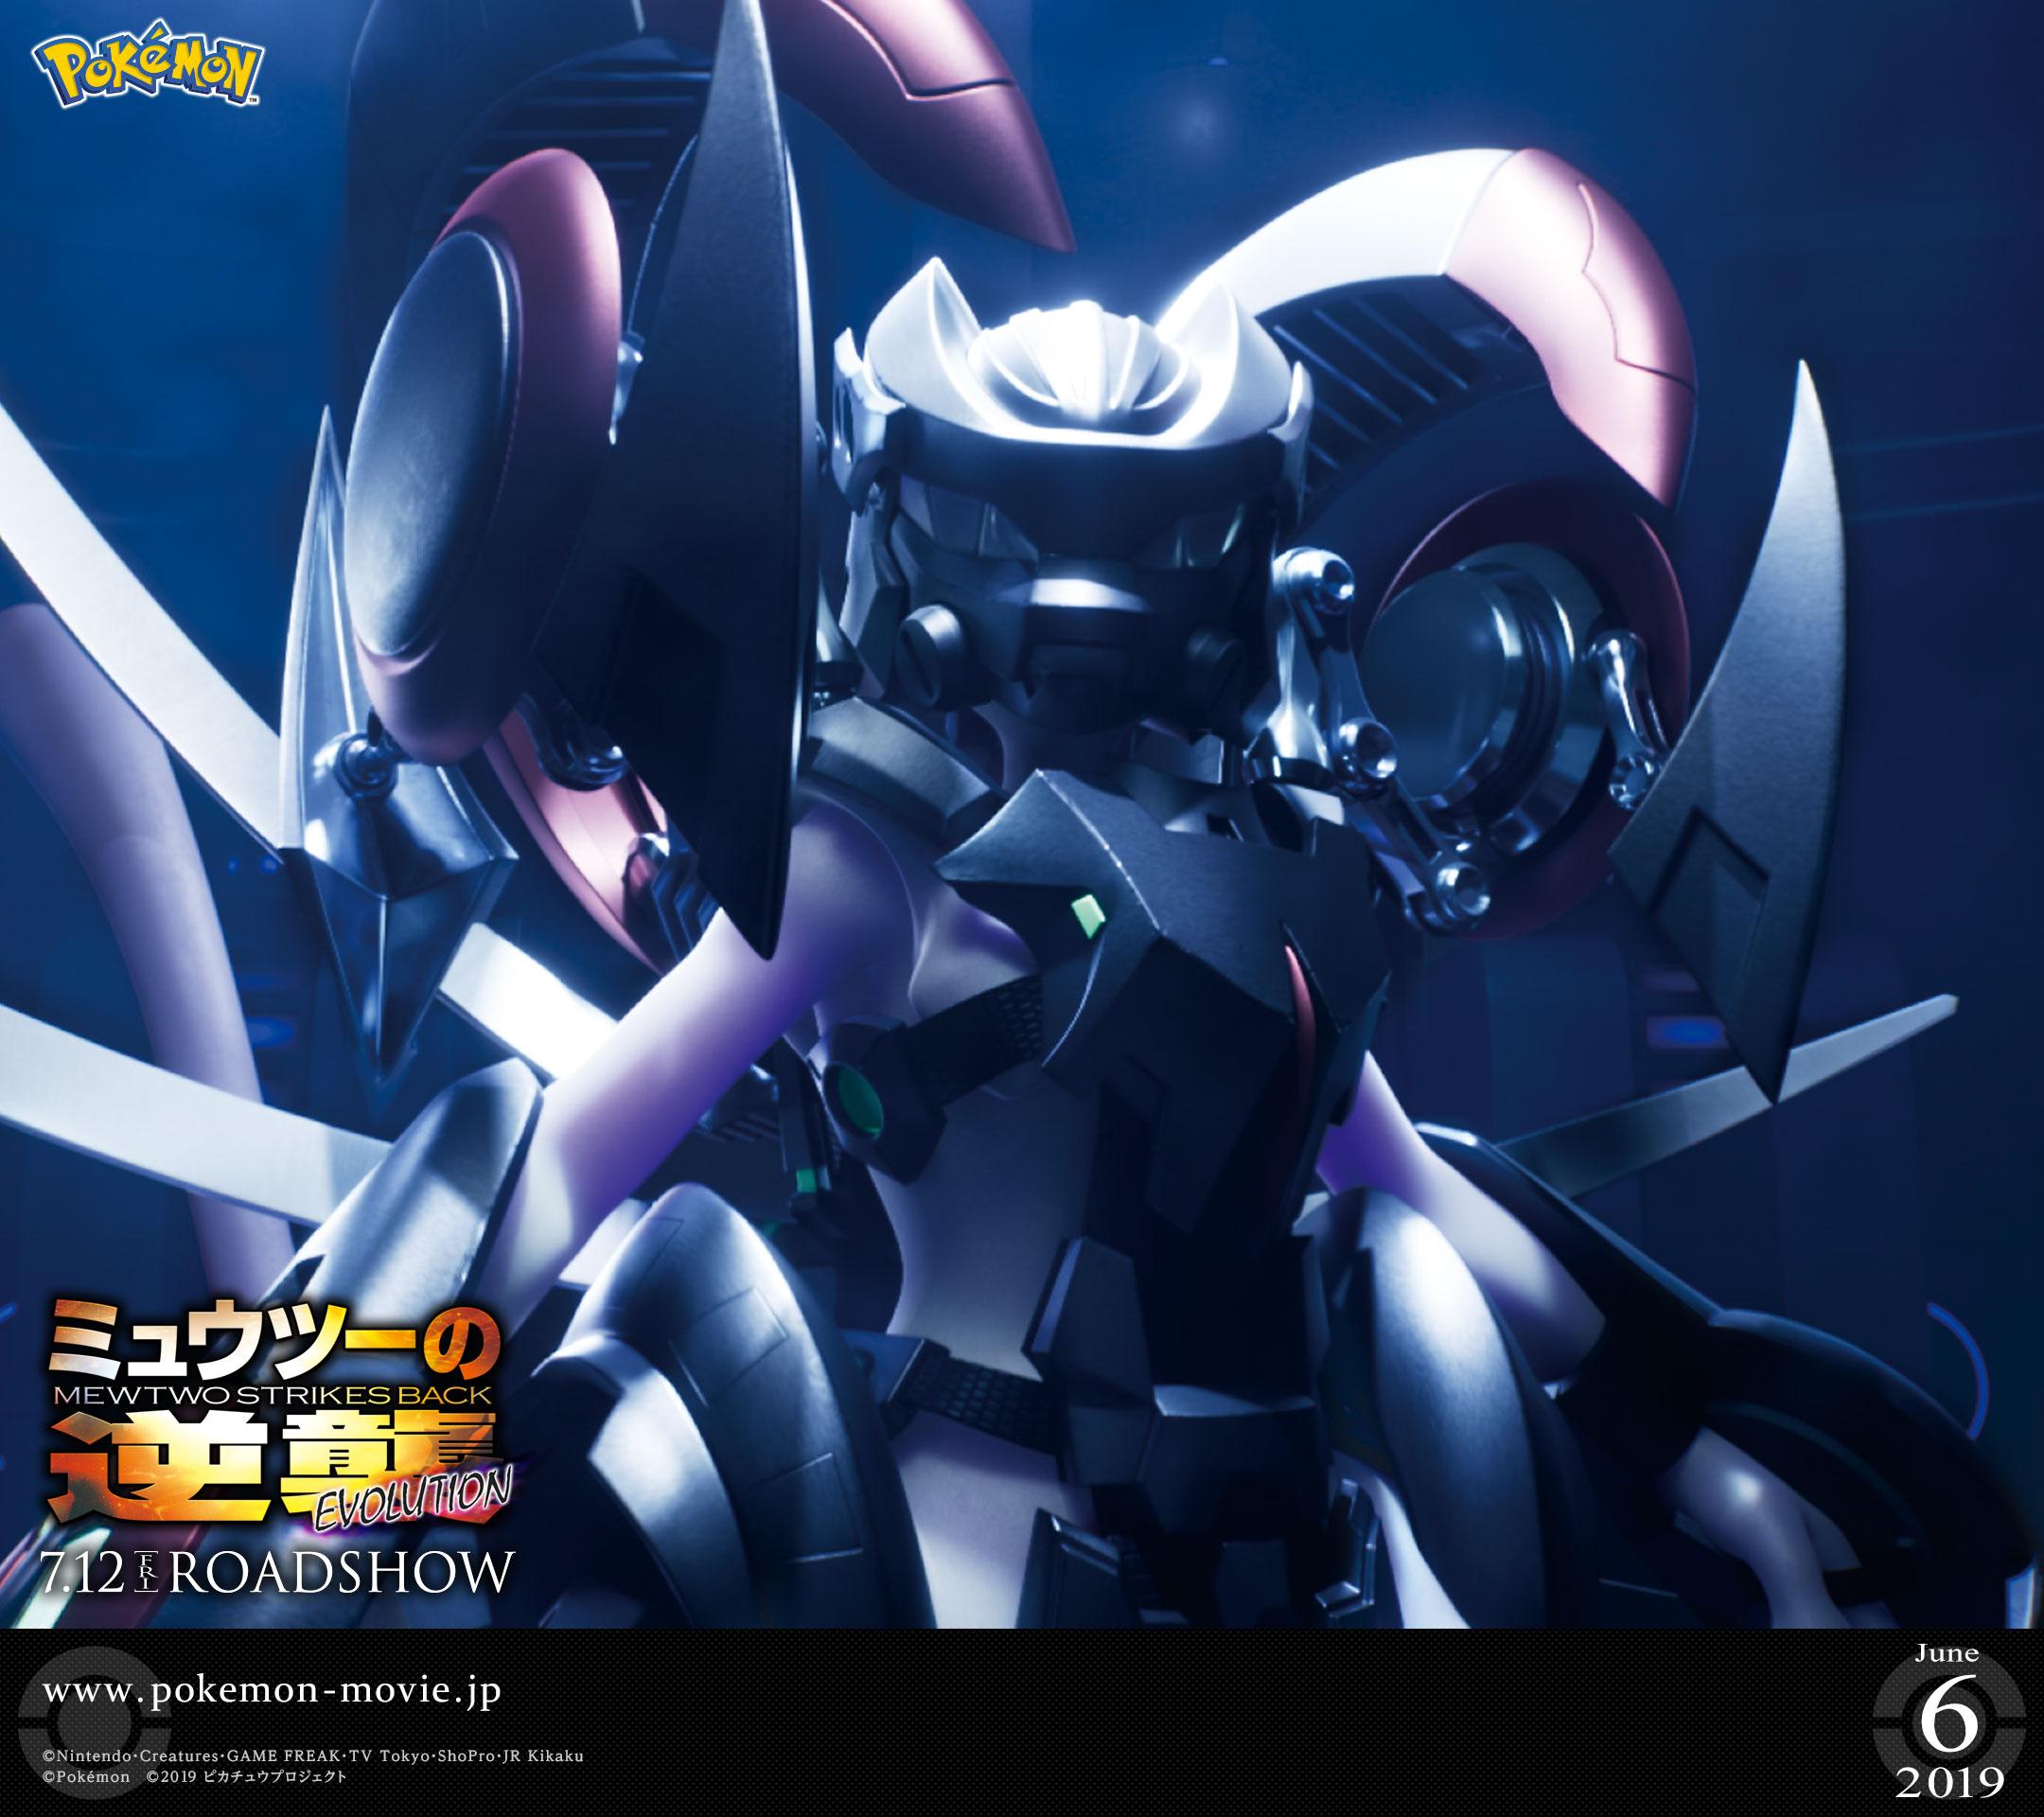 Download A Free Wallpaper Of Armored Mewtwo For PC